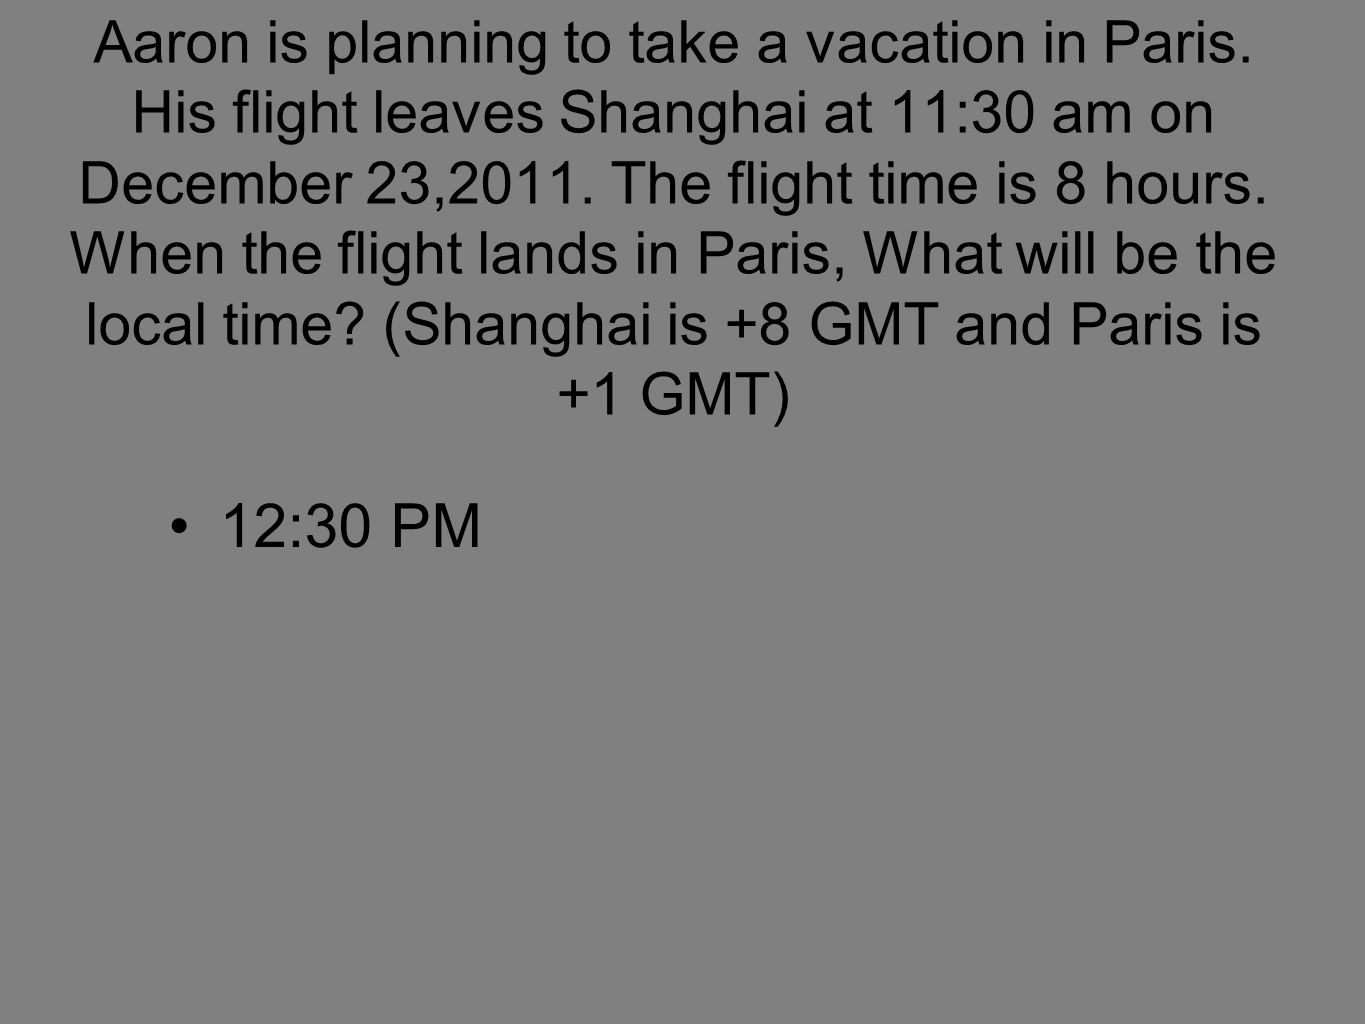 Aaron is planning to take a vacation in Paris.